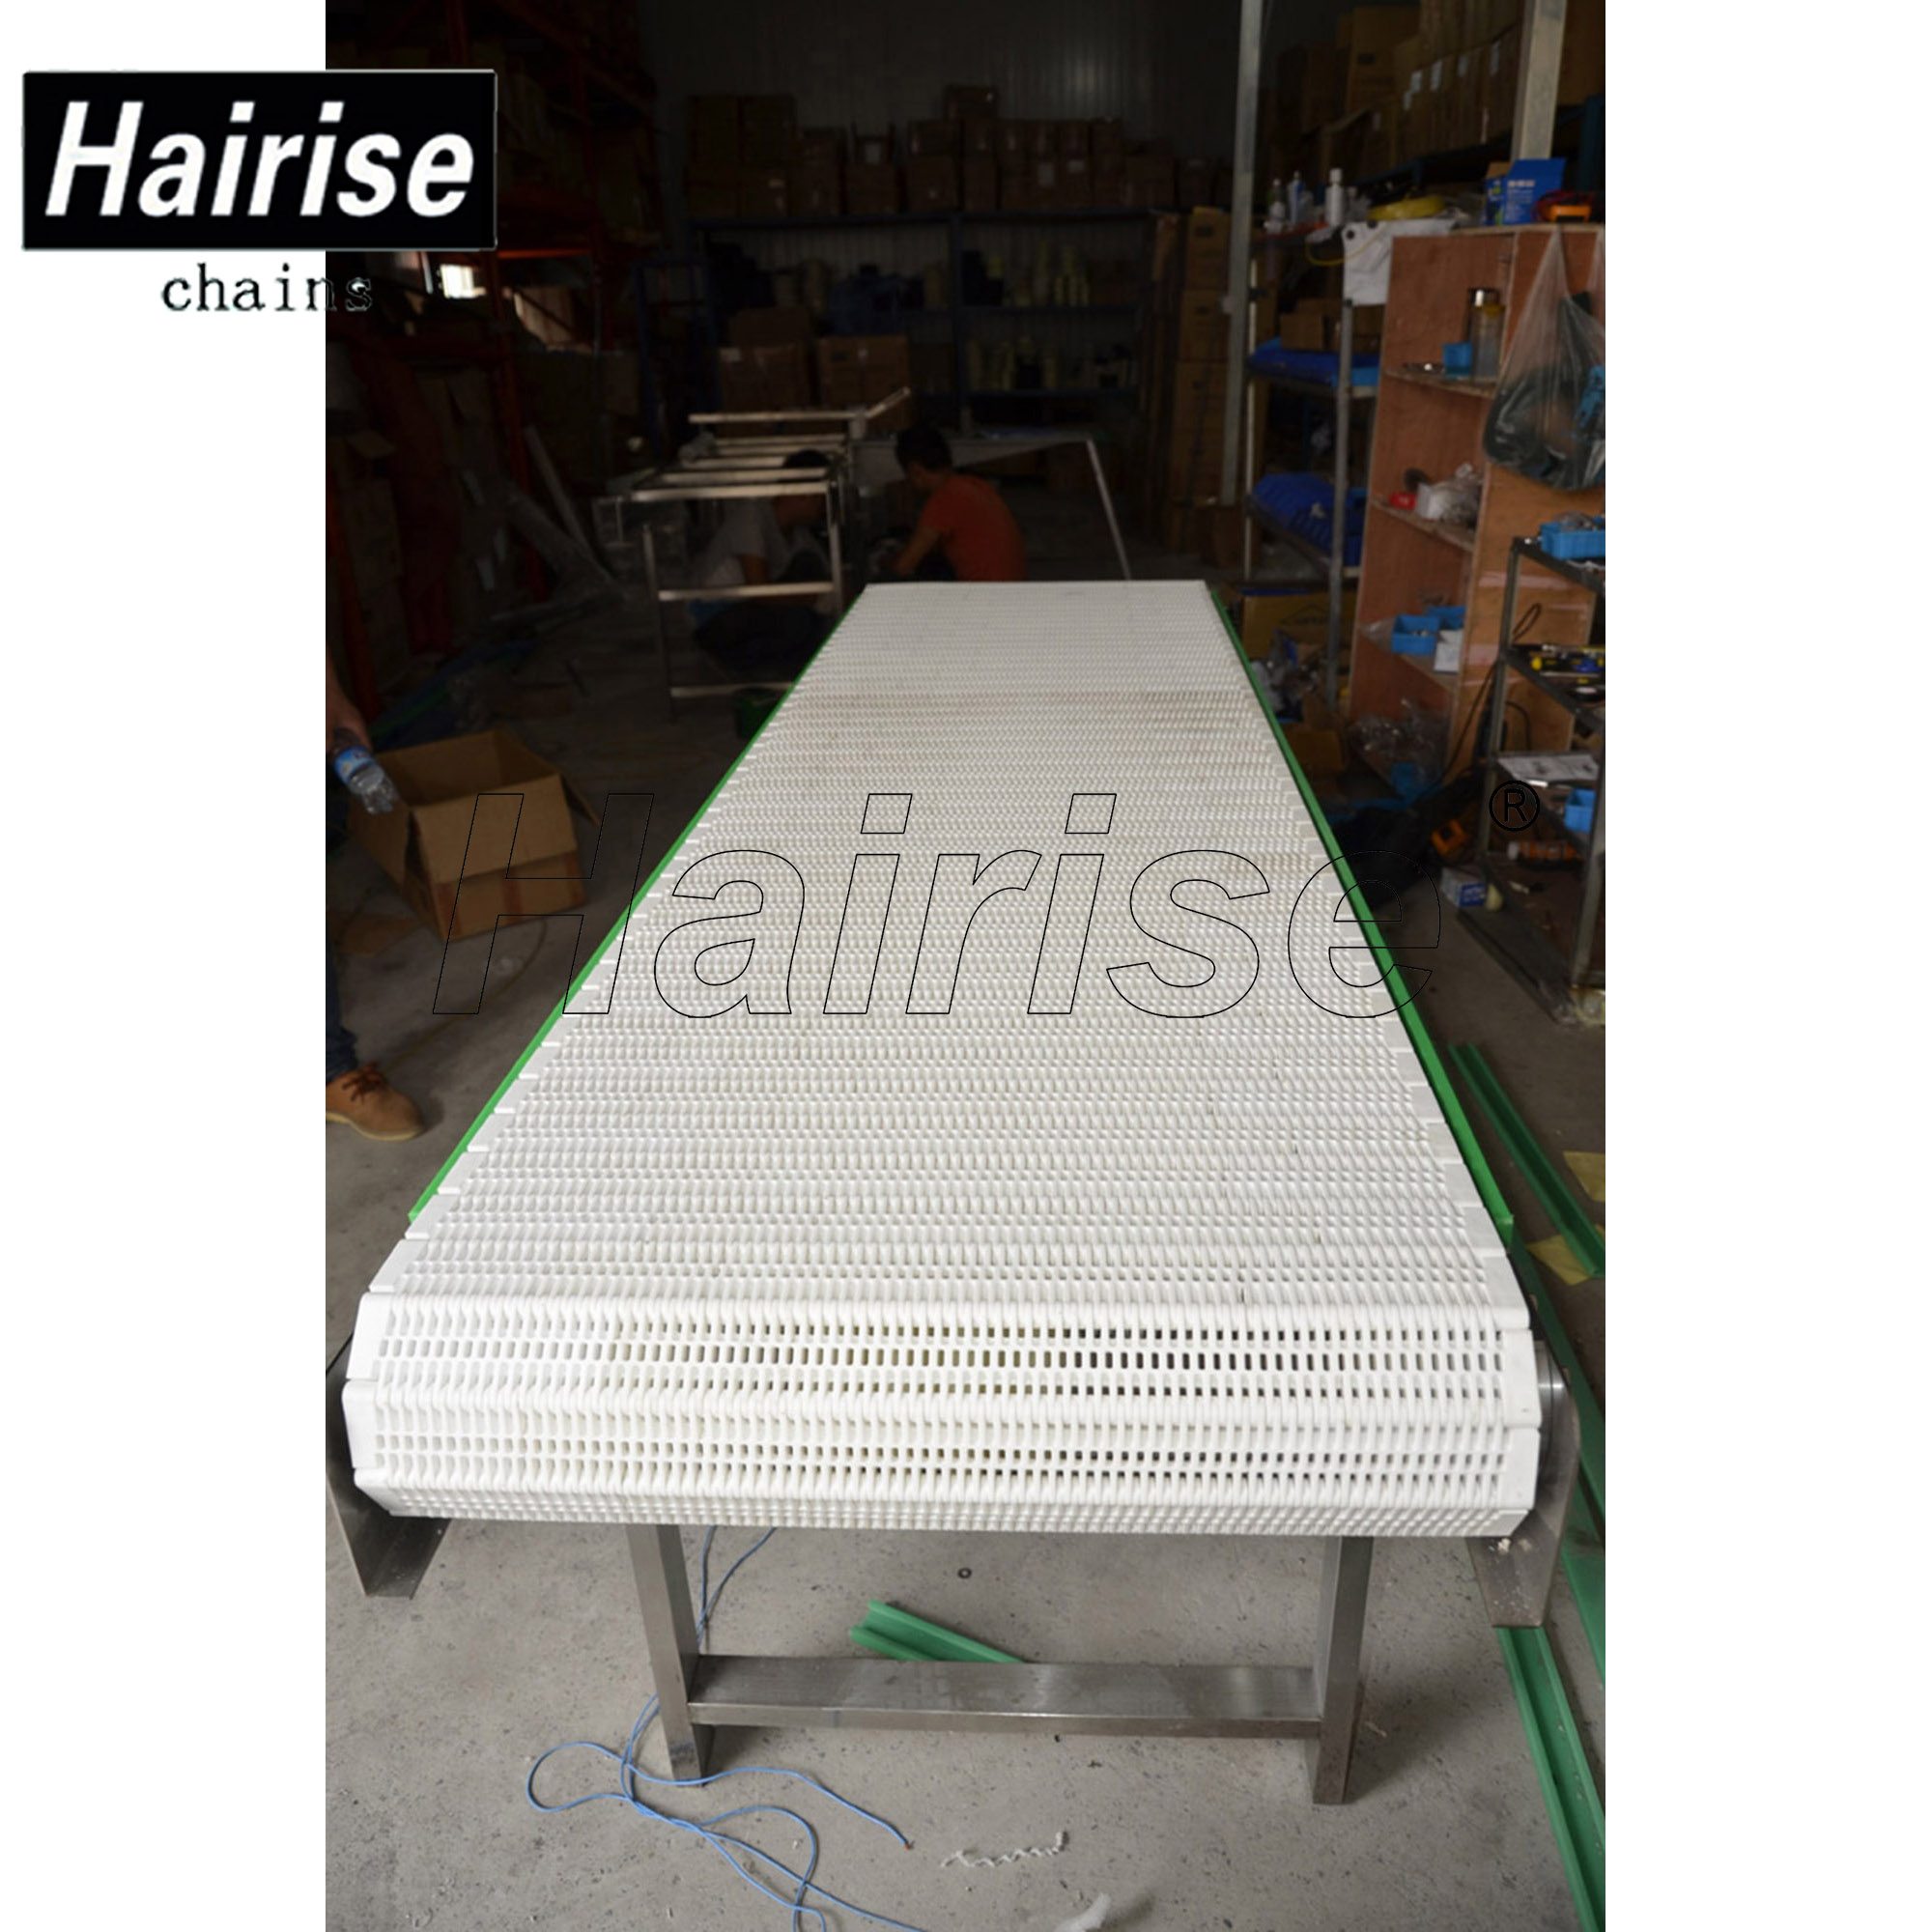 Hairise Straight Conveyor with Modular Belts(Har400) Featured Image